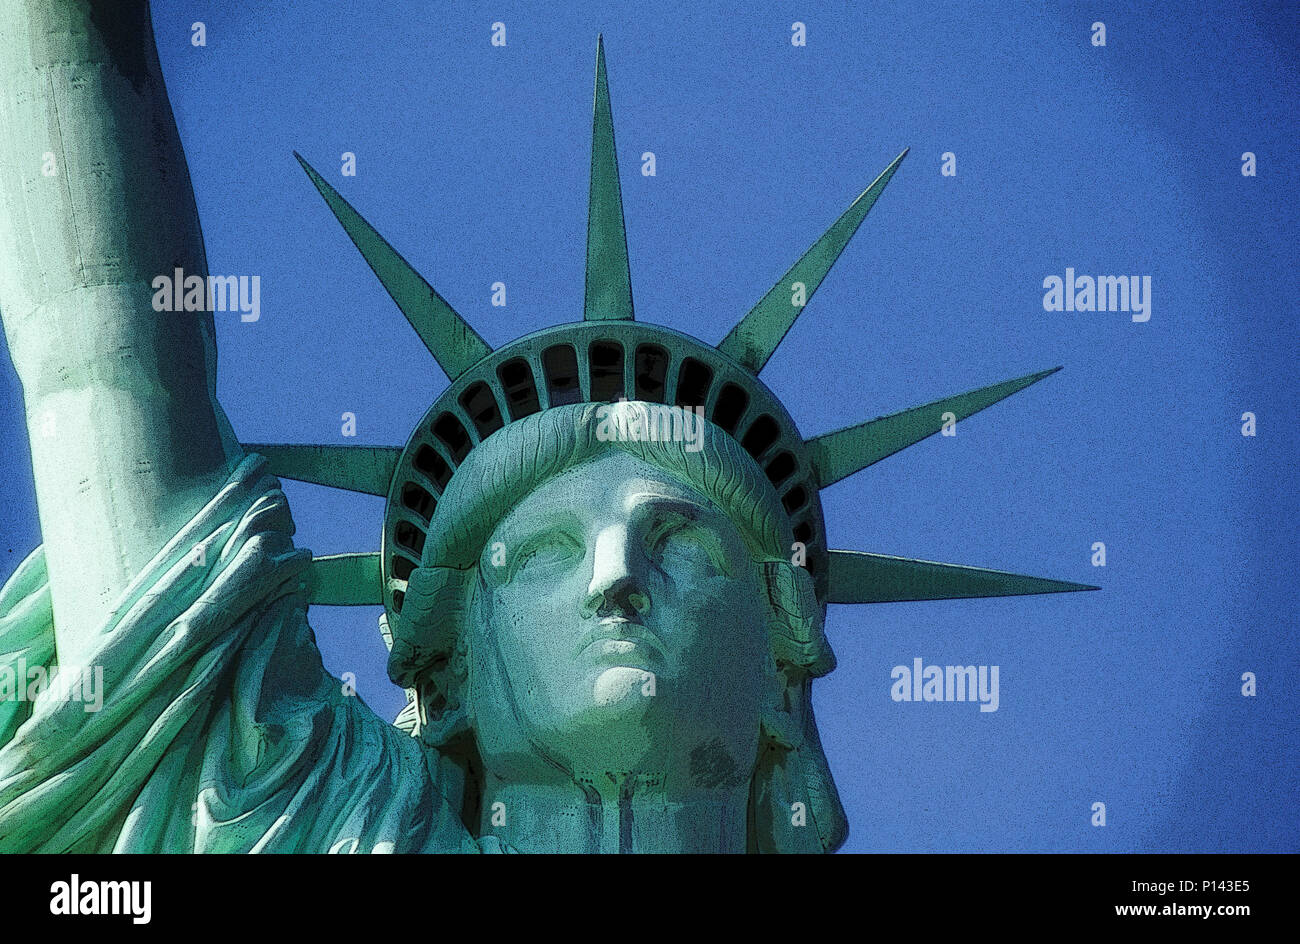 Statue of Liberty, close view of the face and seven pointed crown, New York, NY, USA Stock Photo